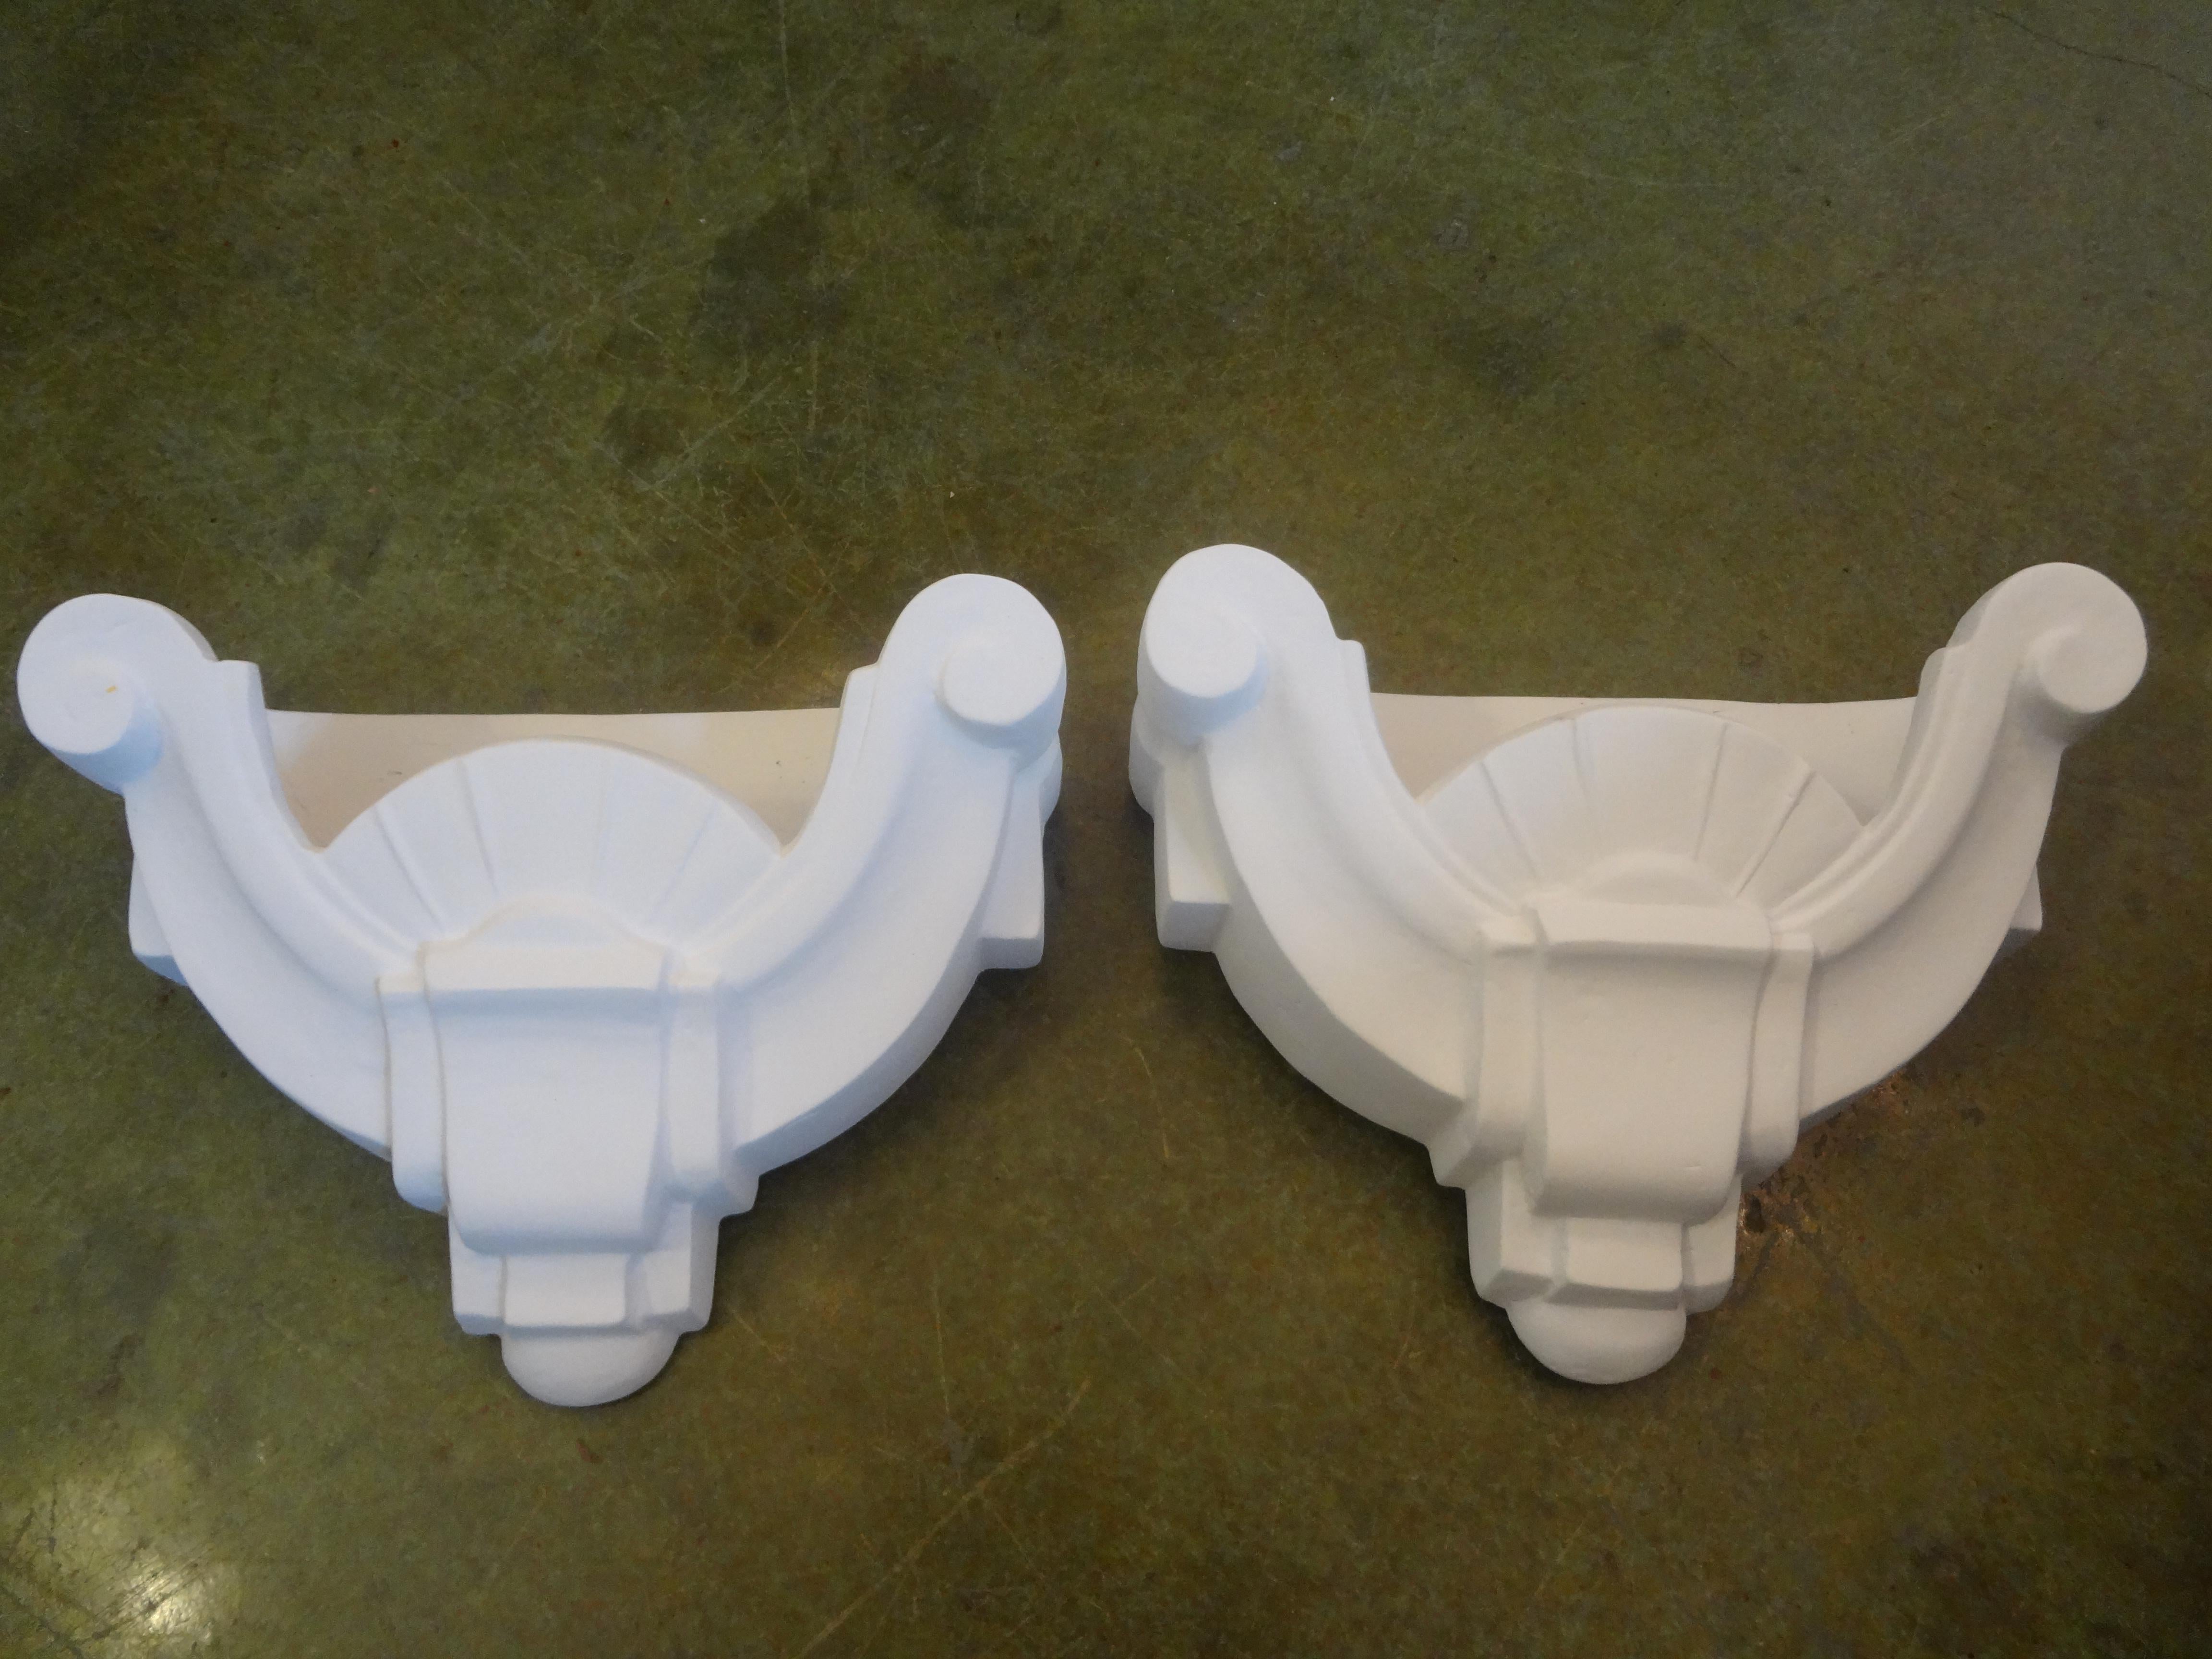 Stunning pair of French Art Deco plaster sconces after Serge Roche. These fabulous plaster sconces have an Art Deco geometric style and have been newly wired to U.S. specifications.